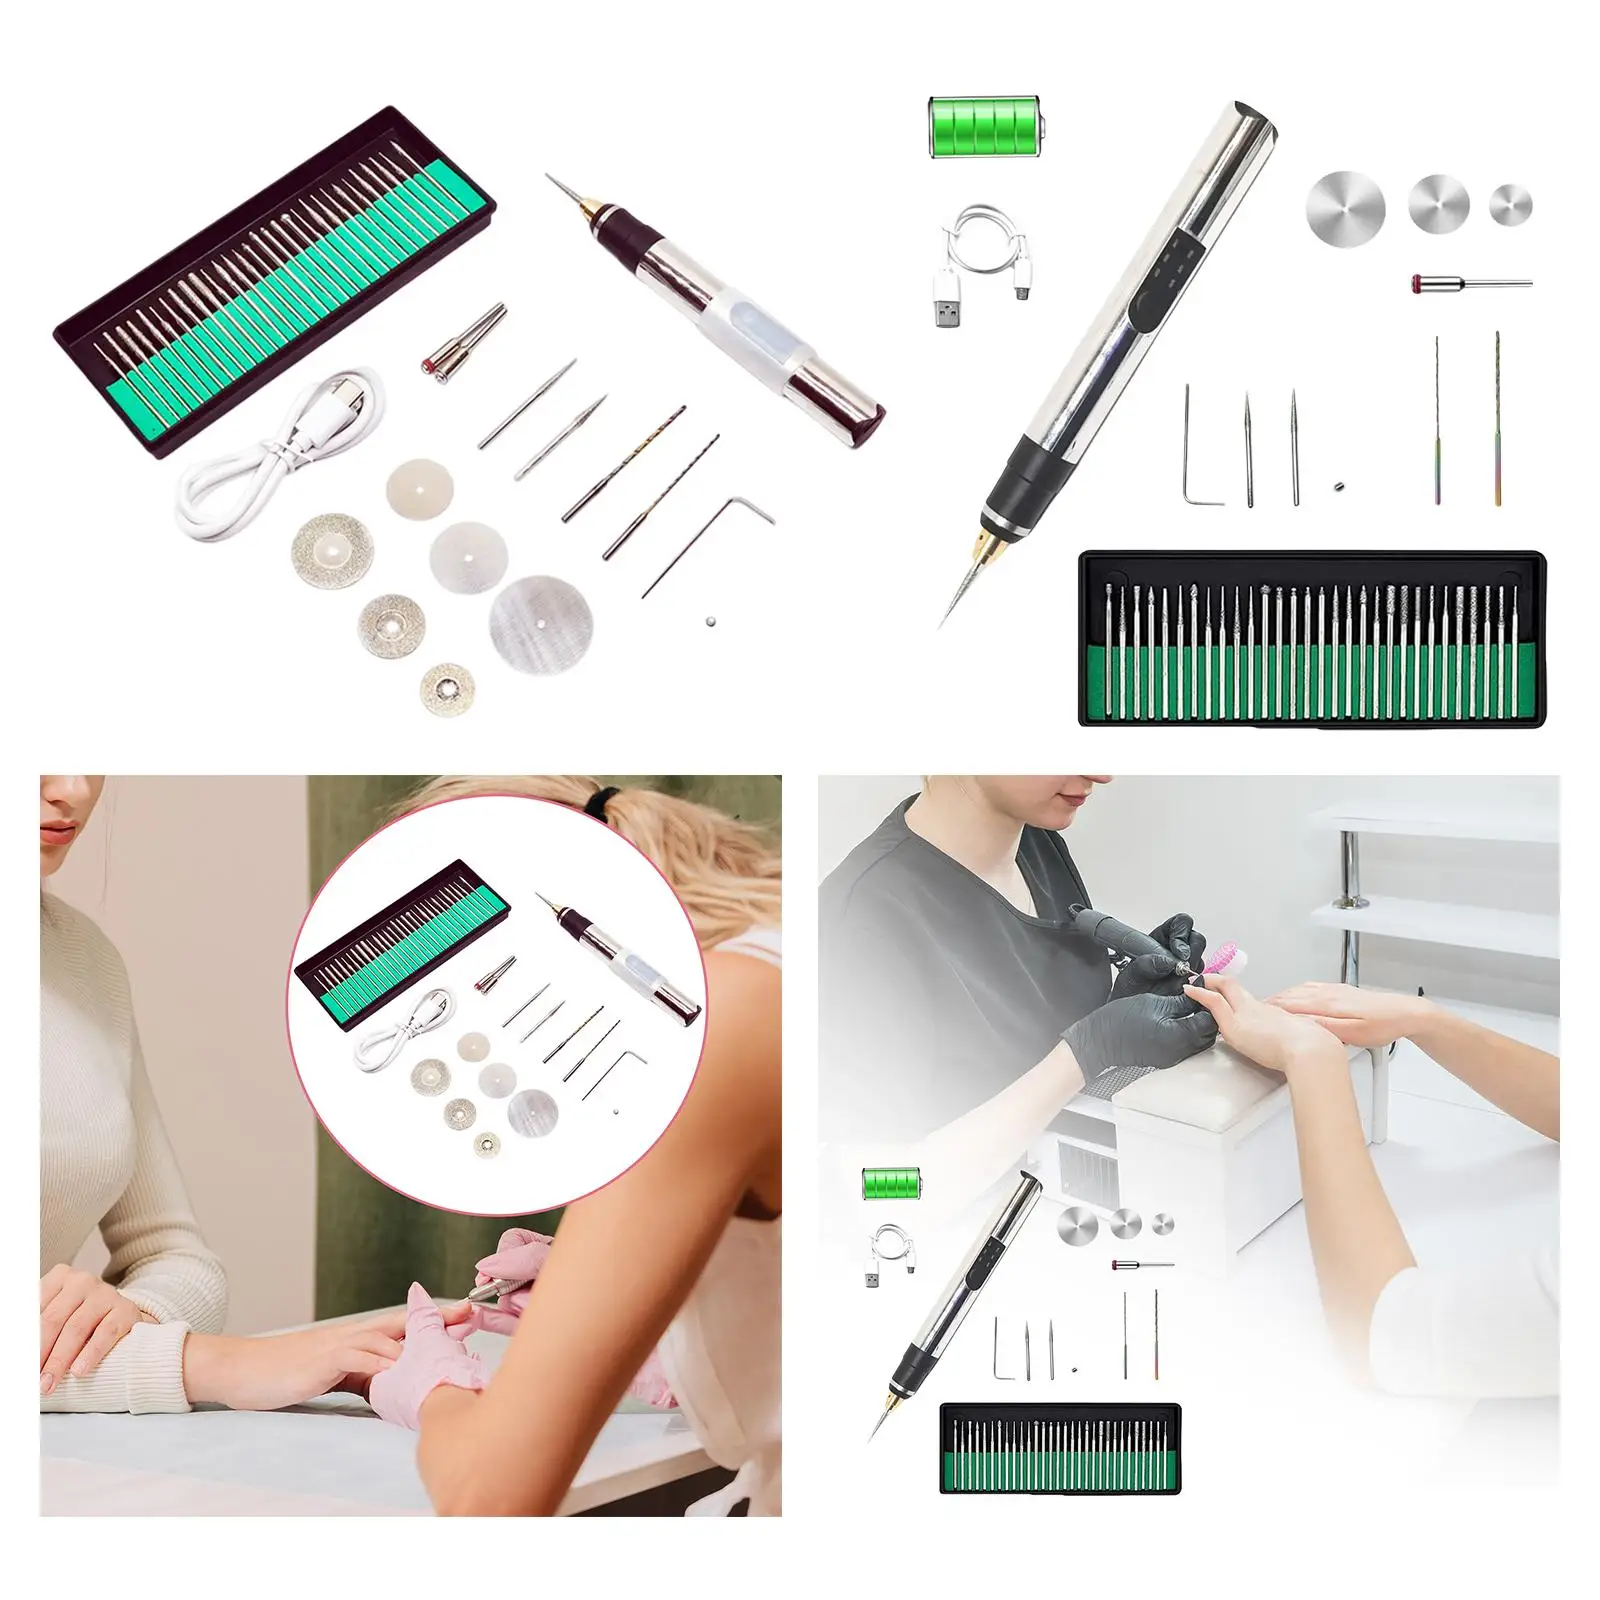 Electric Nail Grinder Set for Home and Salon Use 3 Speed Control Professional Nail Trimmer Set Multipurpose Wireless Drill Pen